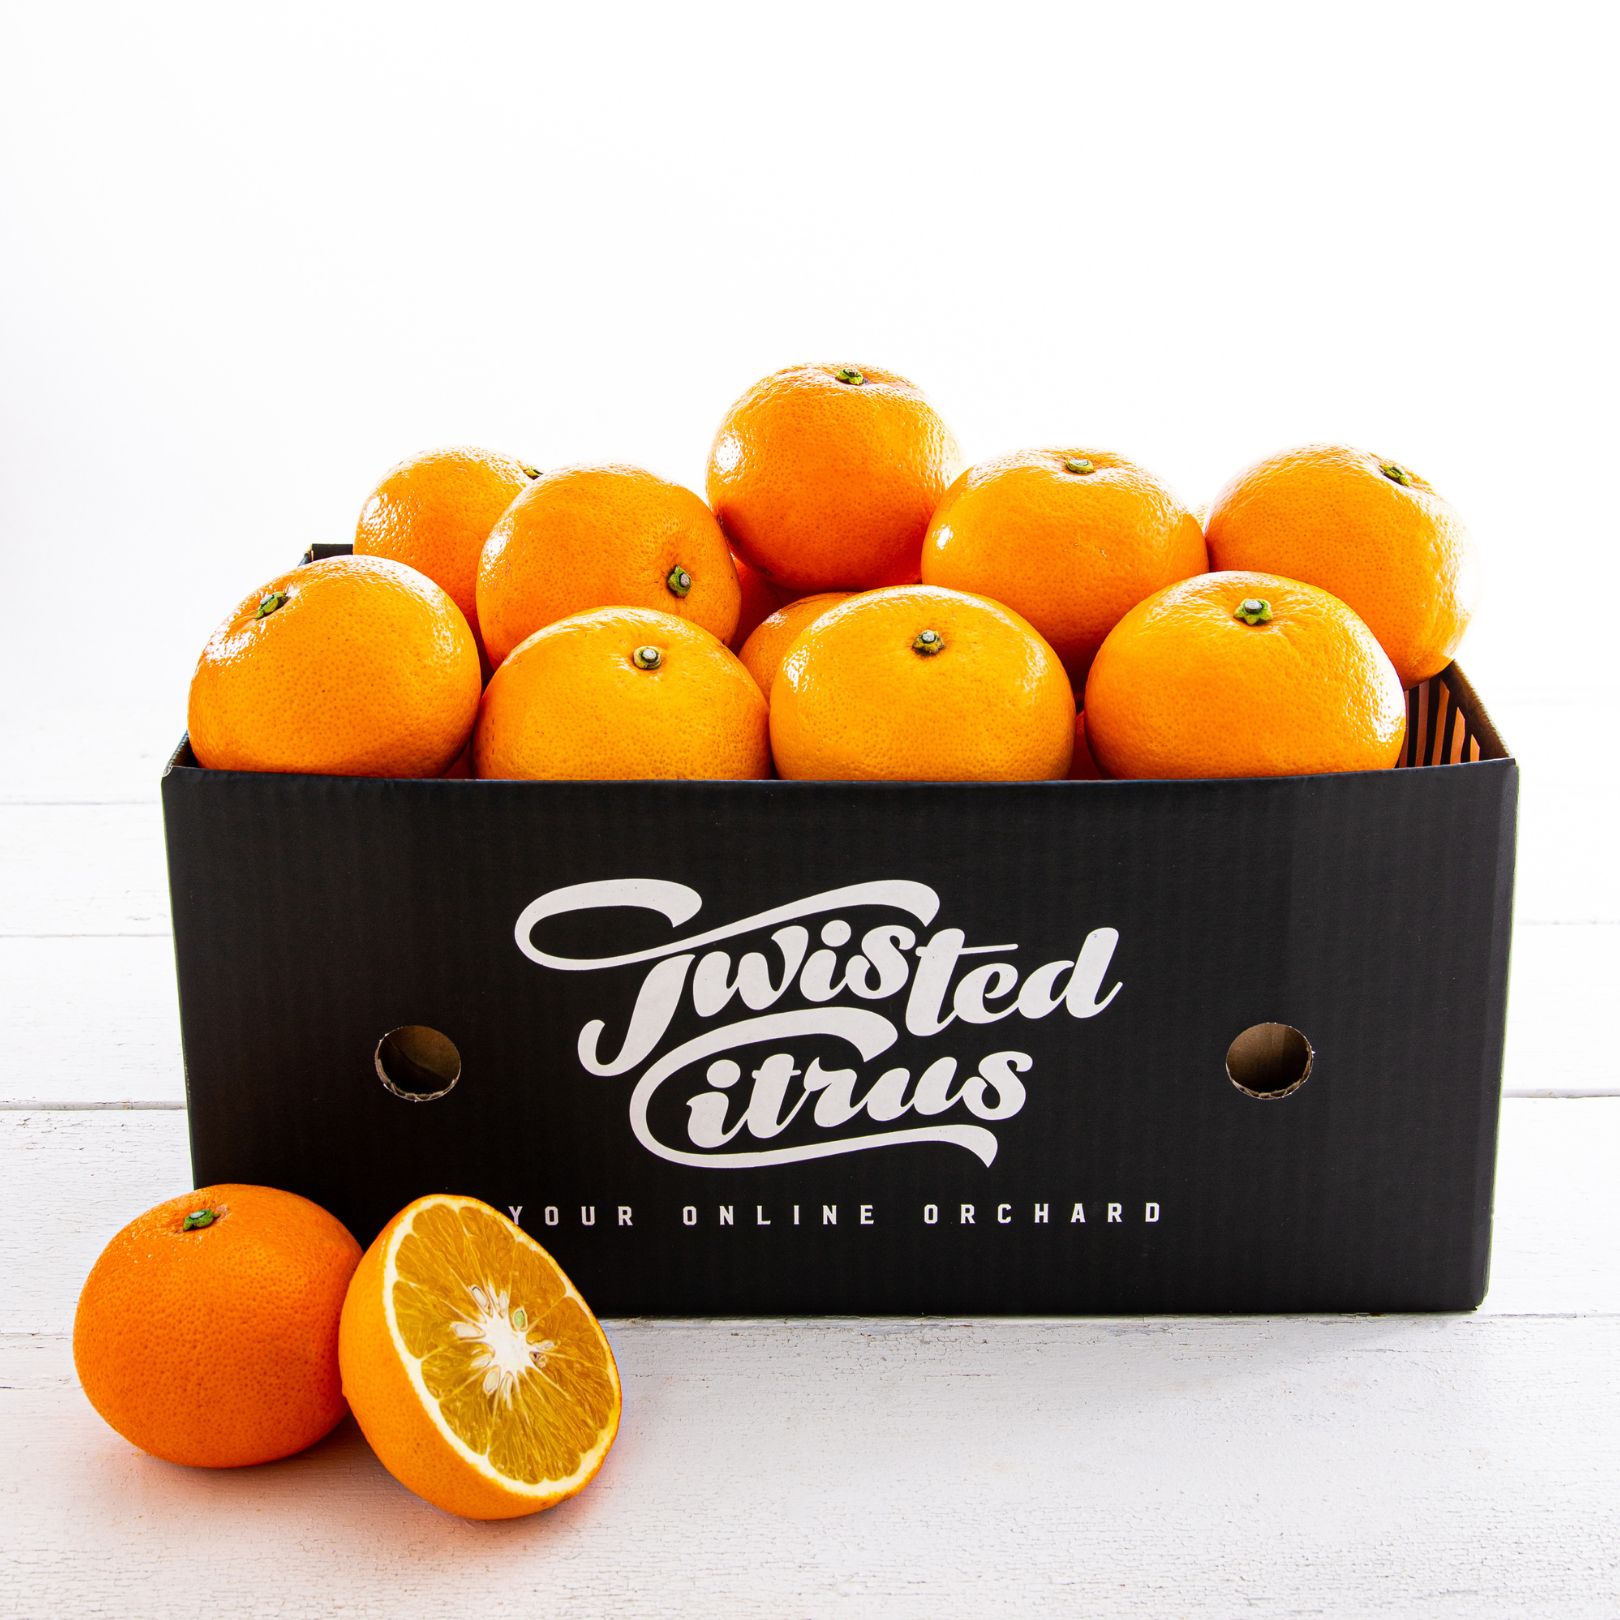 Grapefruit - Cutlers Red fruit box delivery nz